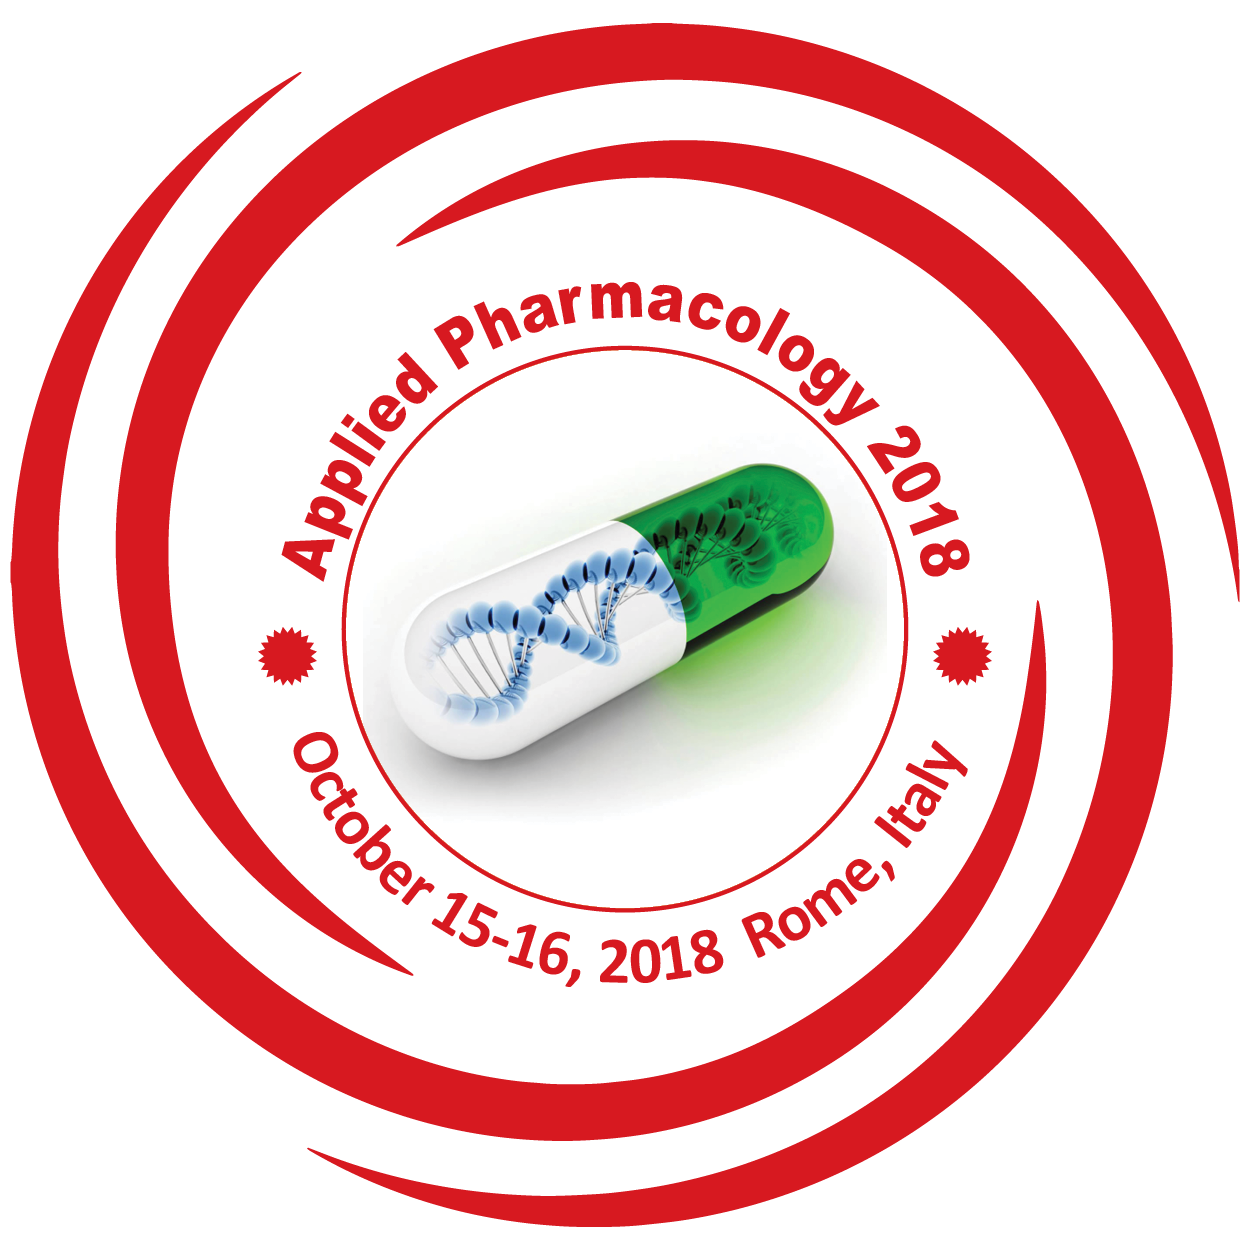 Photos of World Congress on Toxicology and Applied Pharmacology (Applied Pharmacology 2018)